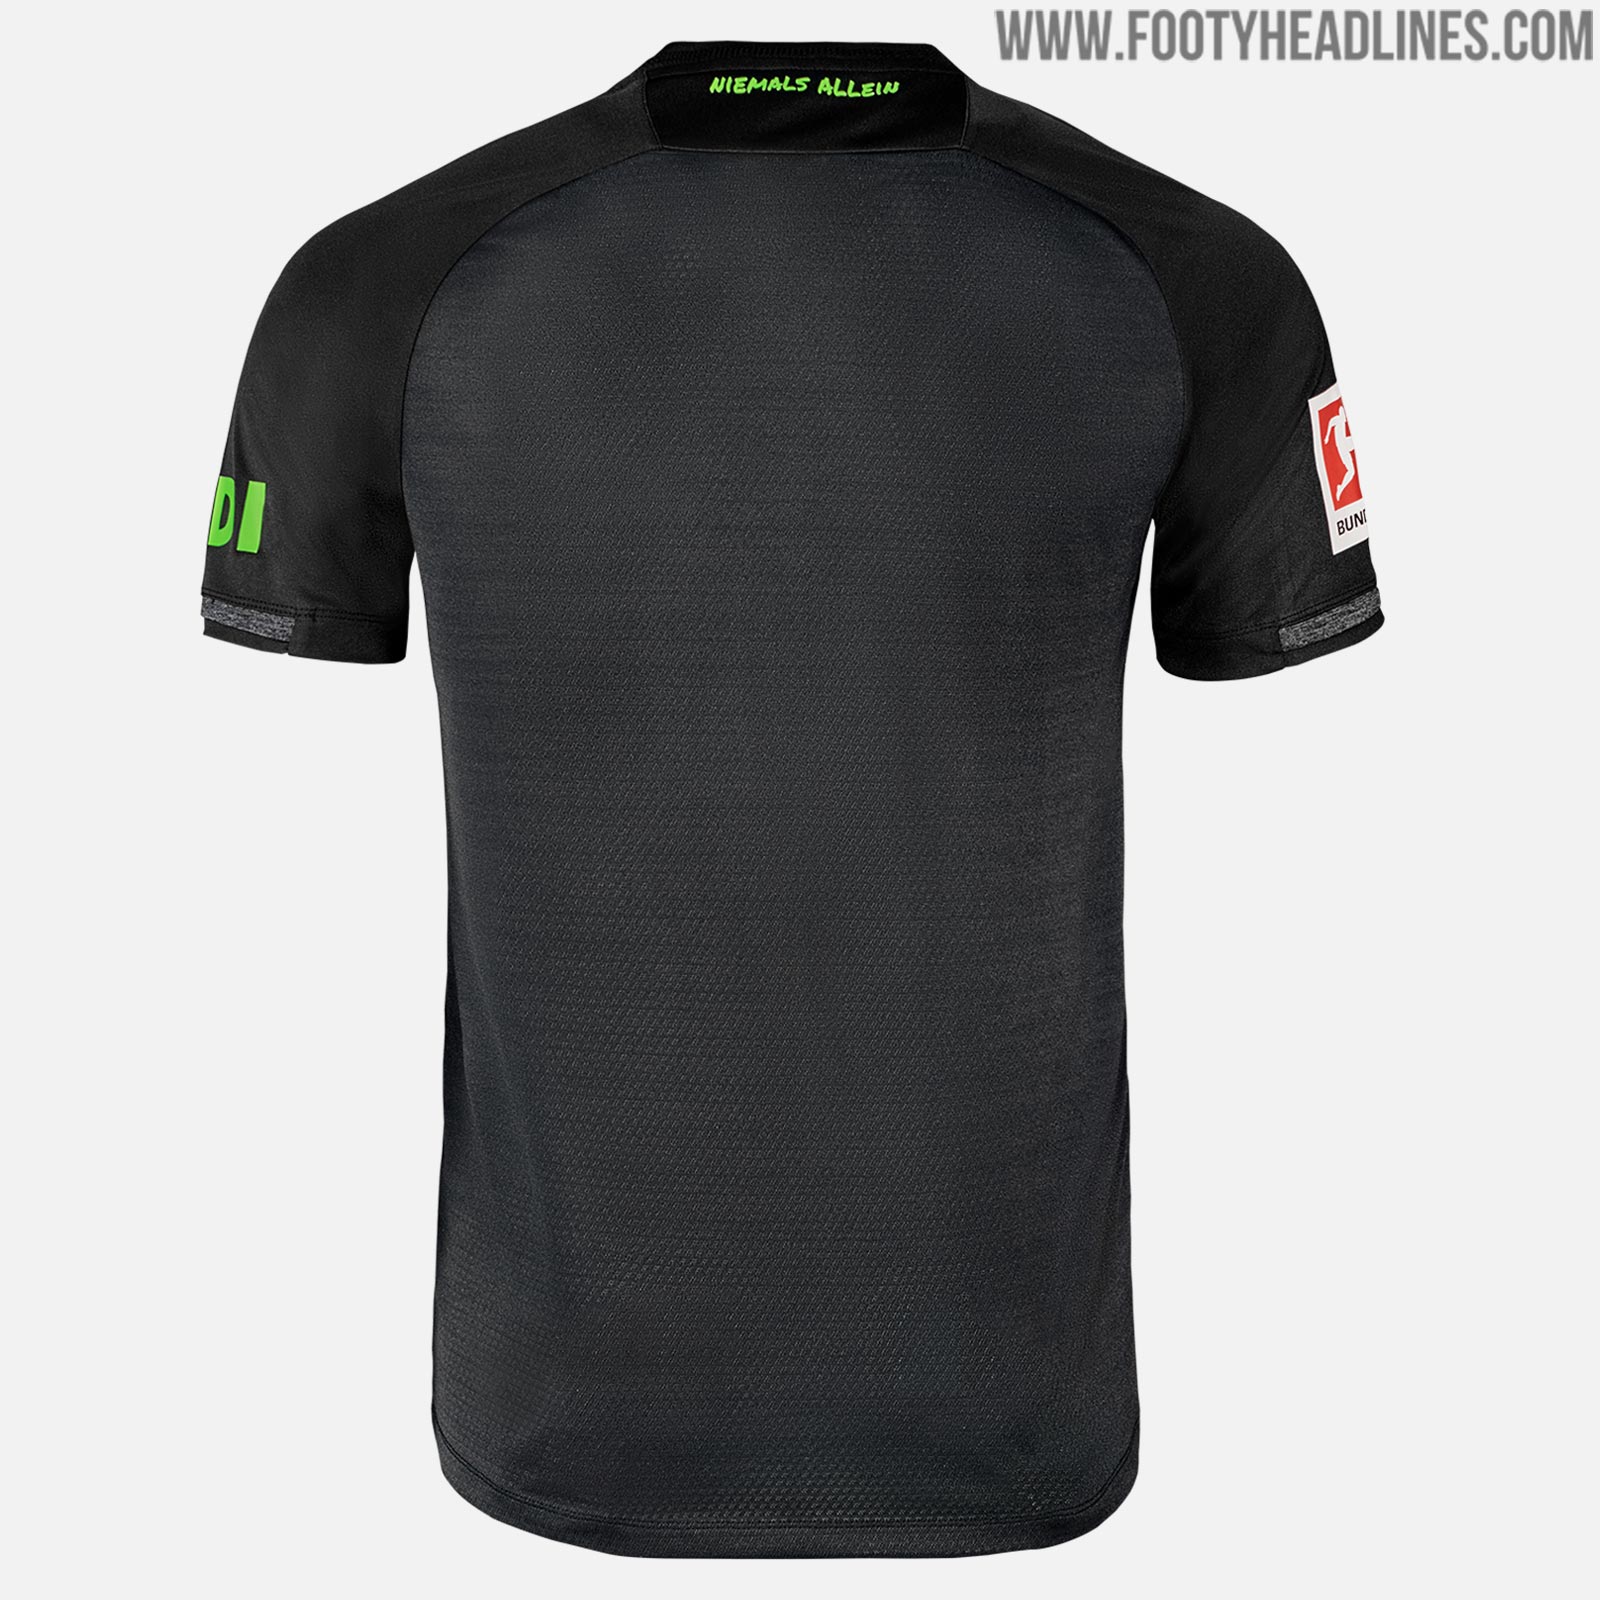 Hannover 96 18-19 Home, Away & Third Kits Released - Footy Headlines